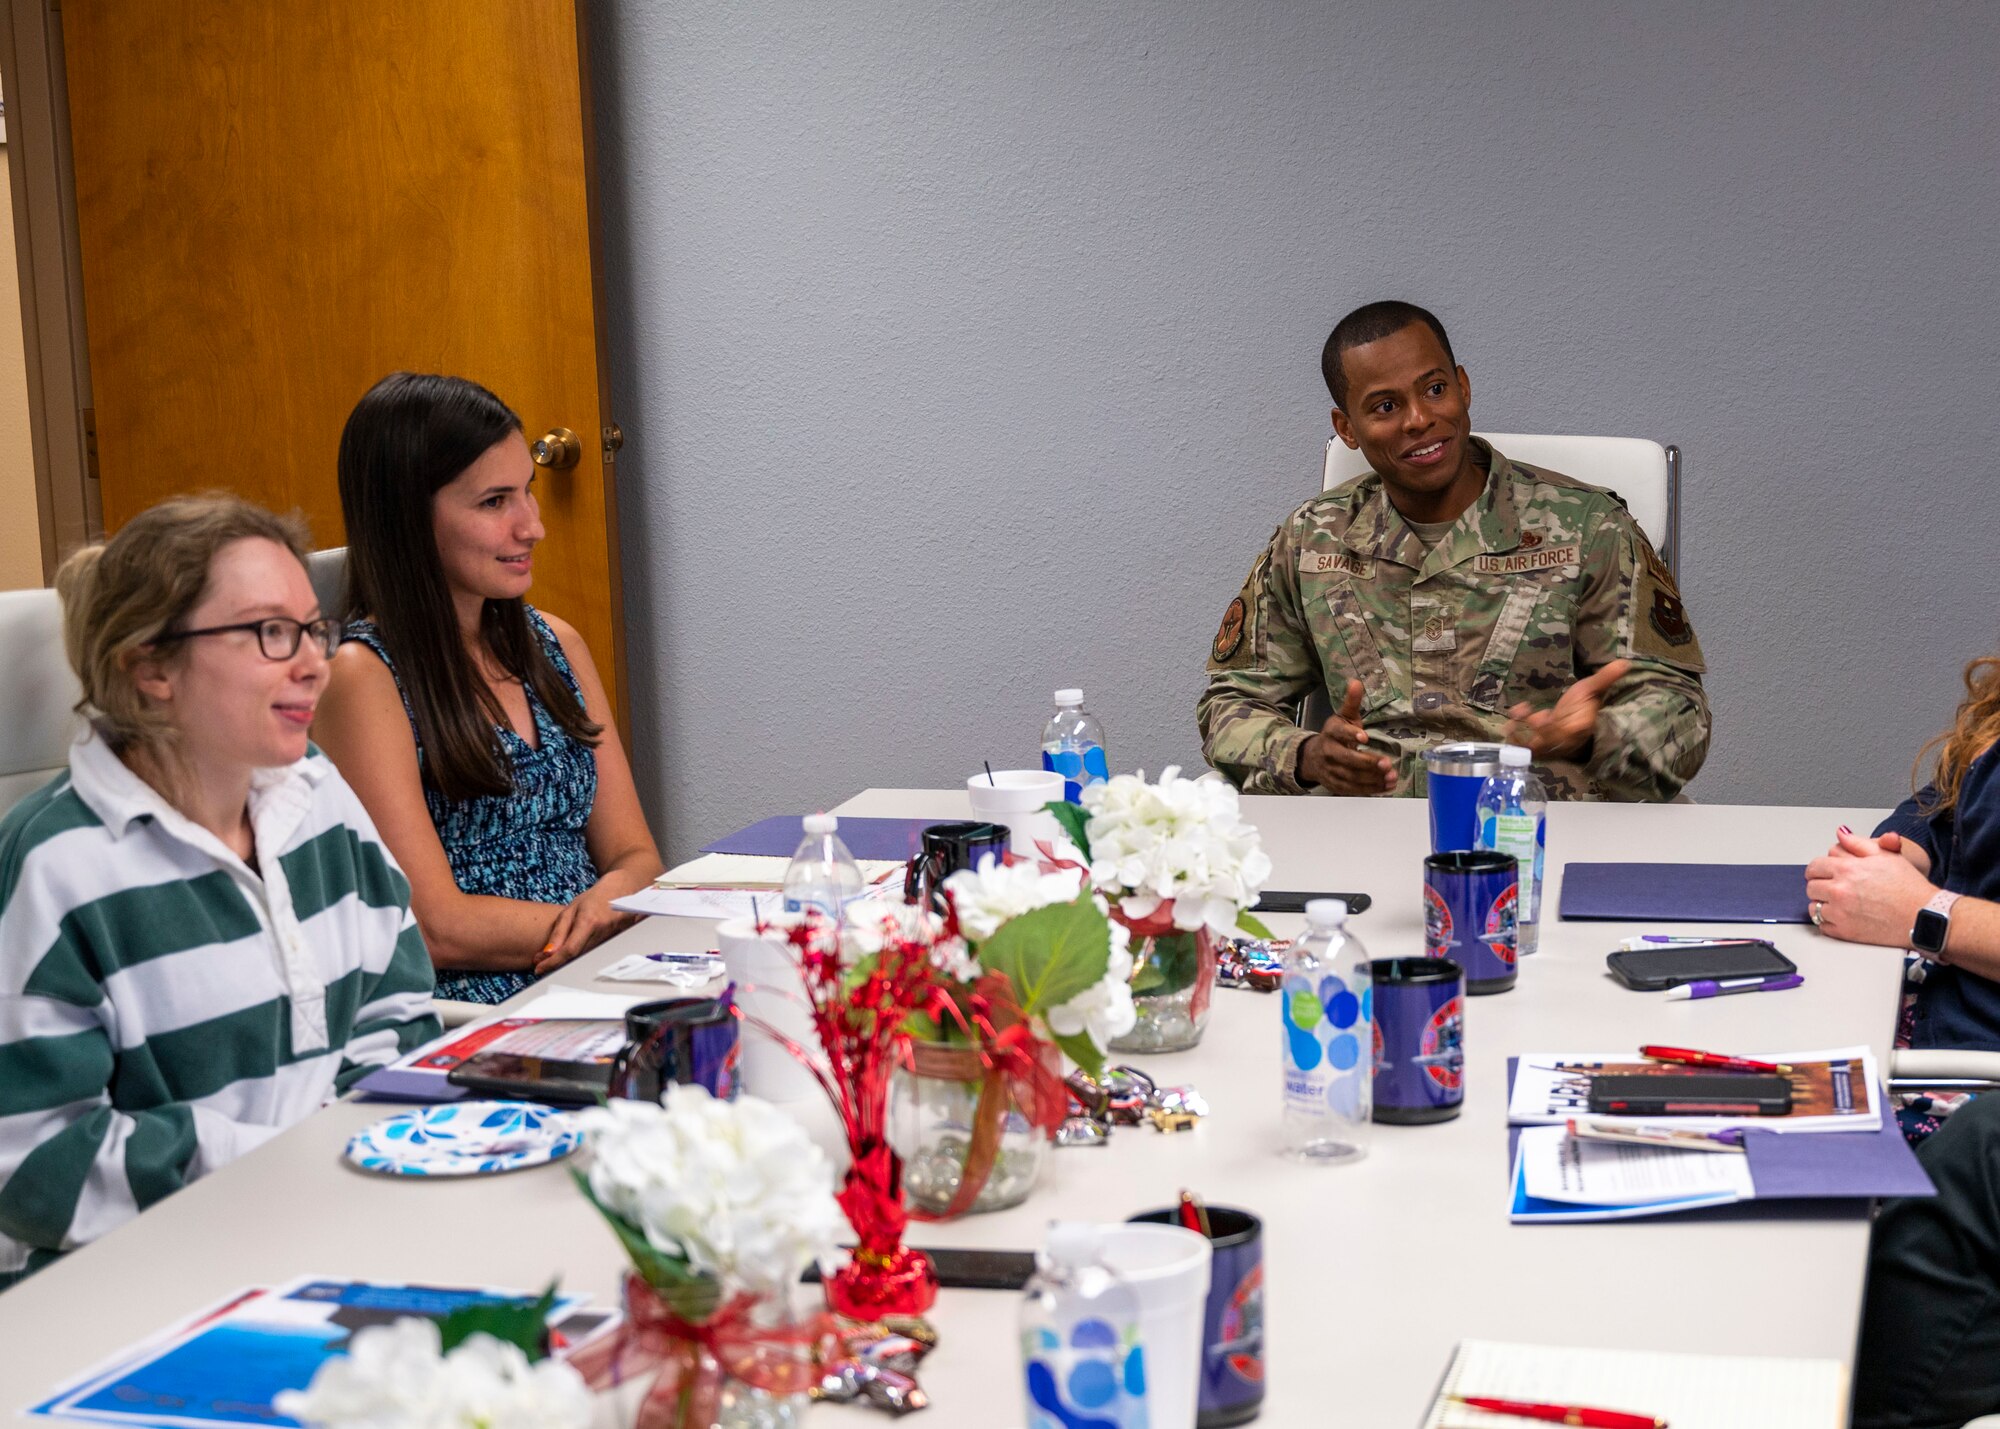 U.S. Air Force Master Sgt. Brandon Savage, 56th Component Maintenance Squadron first sergeant, talks to the military spouses during the Heart Link Spouse Orientation, Oct. 19, 2022, at Luke Air Force Base, Arizona.